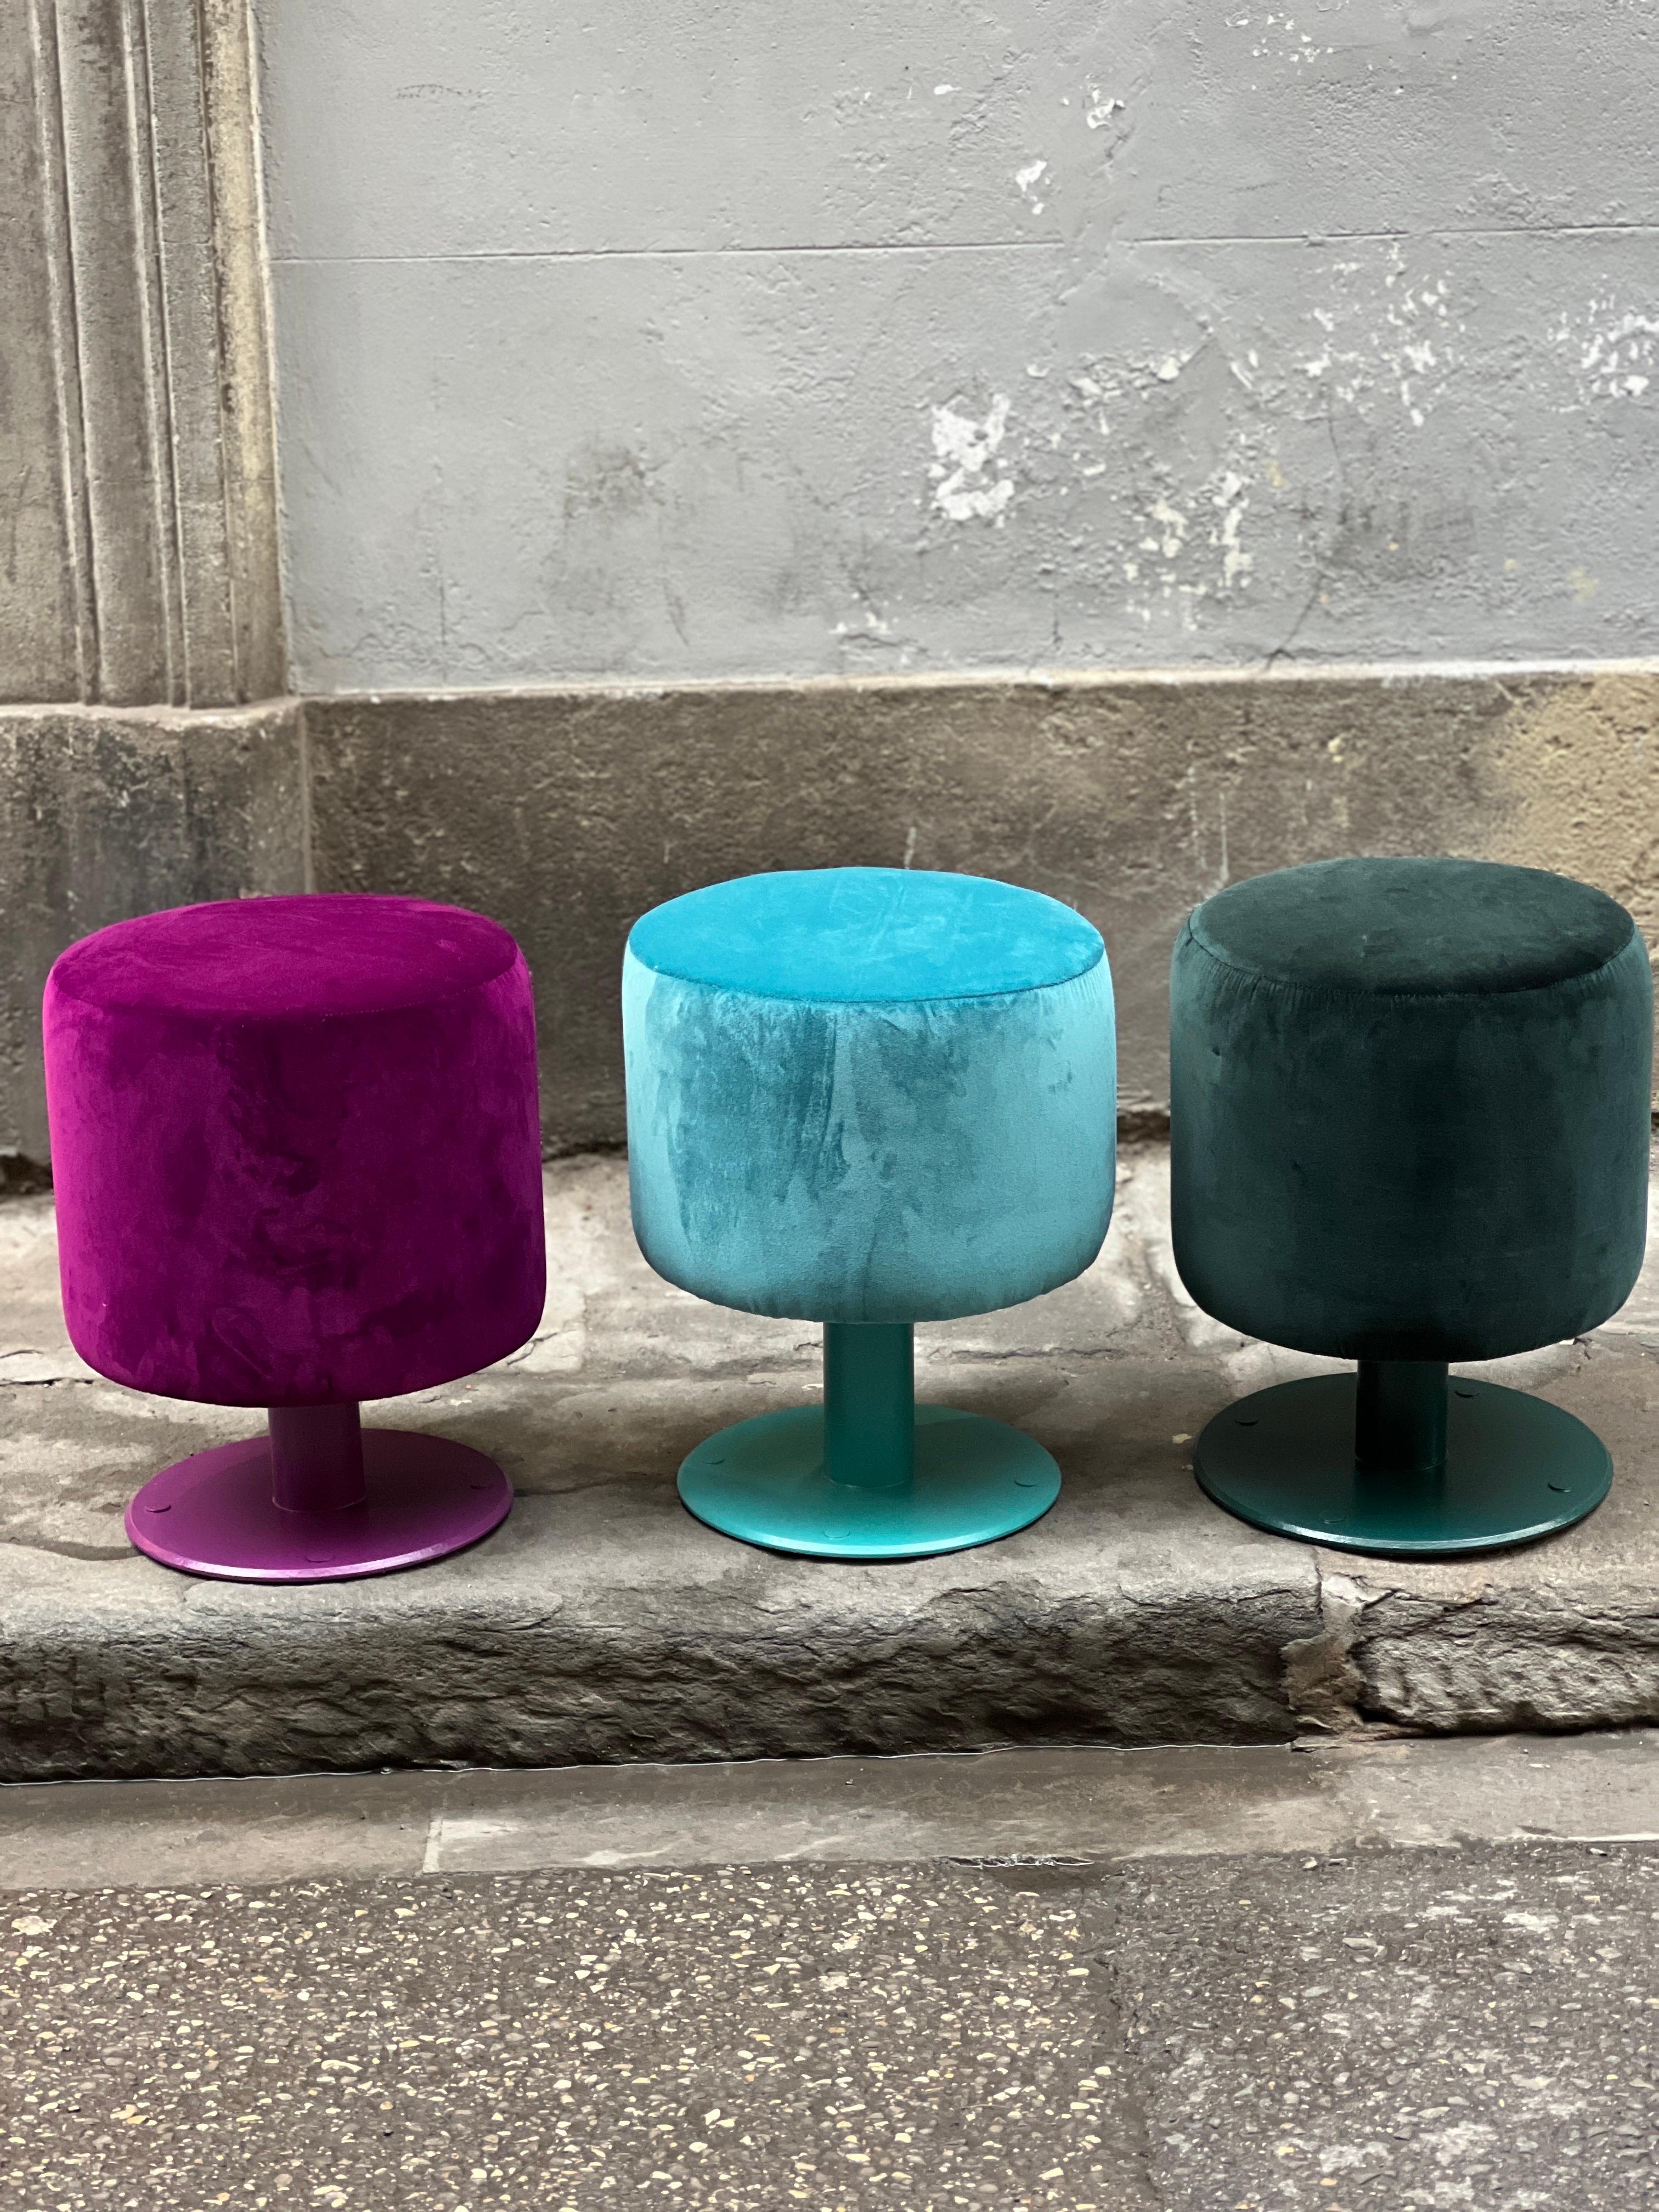 Pair of Vintage Poufs Newly Upholstered in turquoise and cyclamen pink. The metal is lacquered and matching with velvet.
They come from a disused ship, in fact there were holes in the metal base to anchor them to the floor.
Can be sold individually.